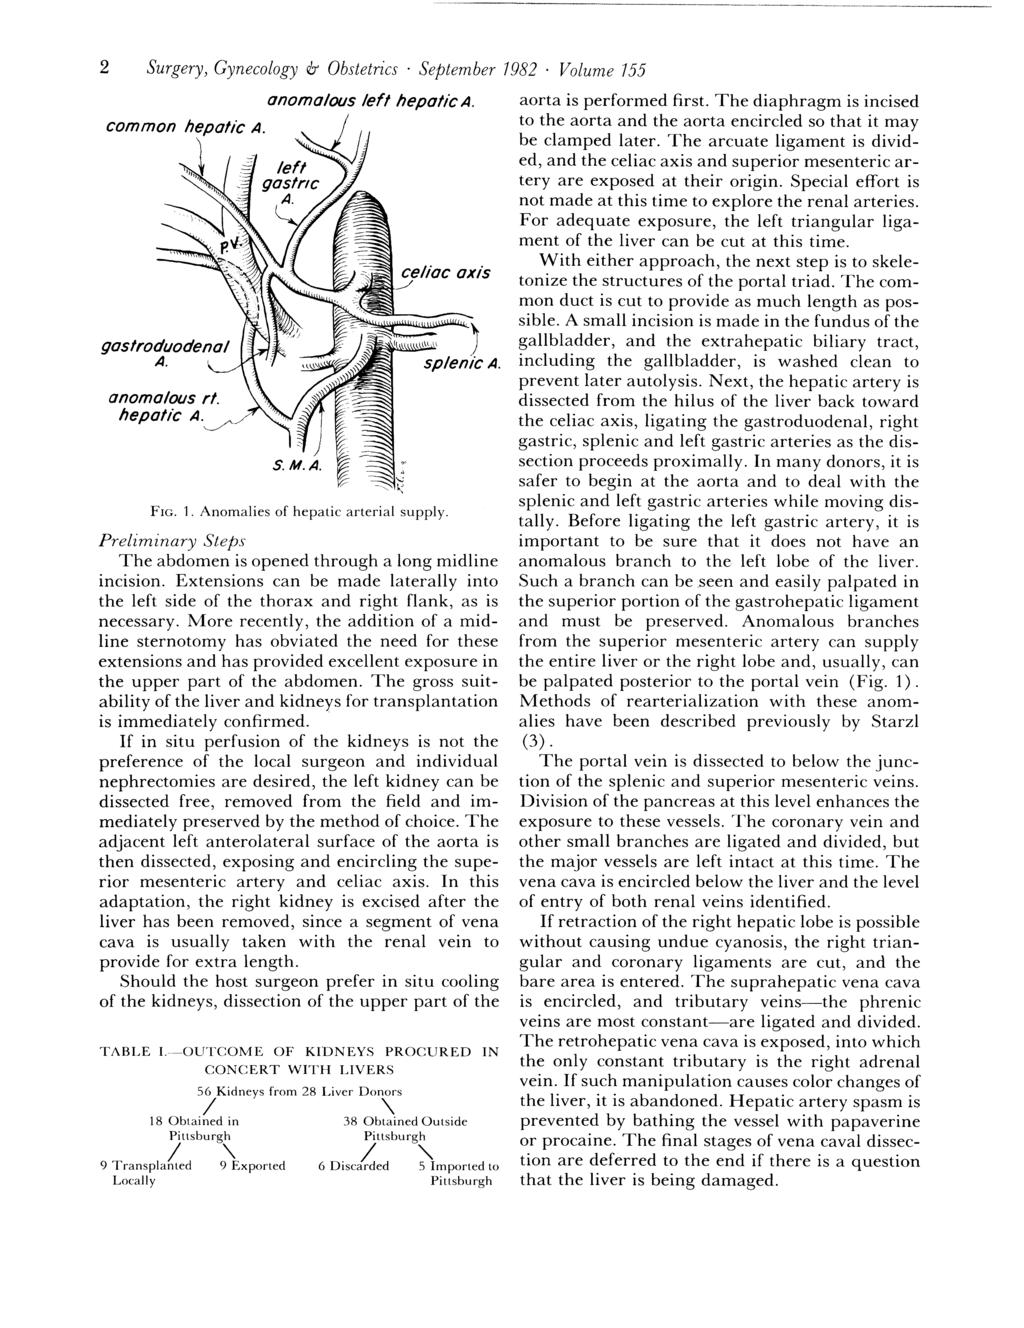 2 Surgery, Gynecology & Obstetrics' September 1982. Volume 755 common anomalous rt. hepatic A. FIG. 1. Anom;tlies of hepatic arterial supply. :'U/~/"'C. A. Preliminary Steps The abdomen is opened through a long midline incision.